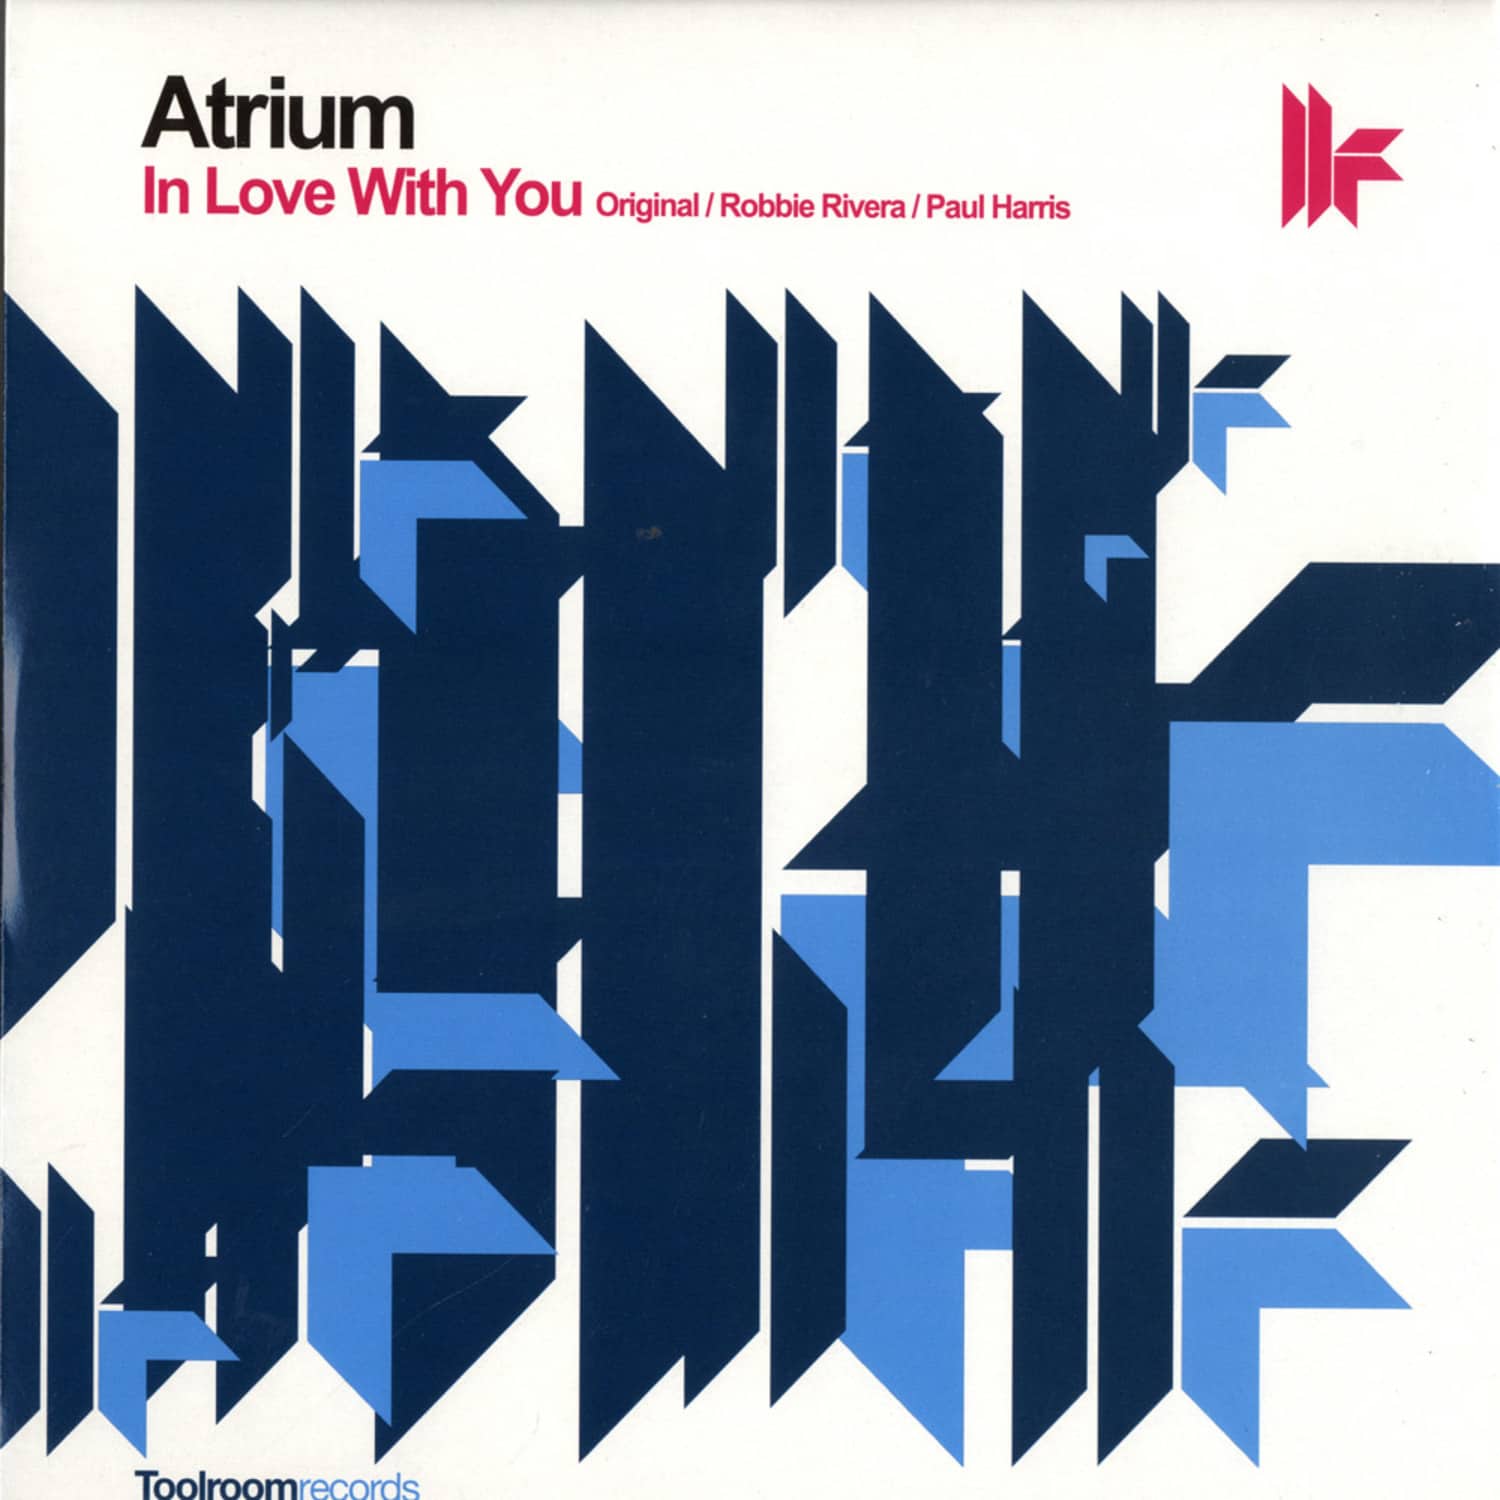 Atrium - IN LOVE WITH YOU